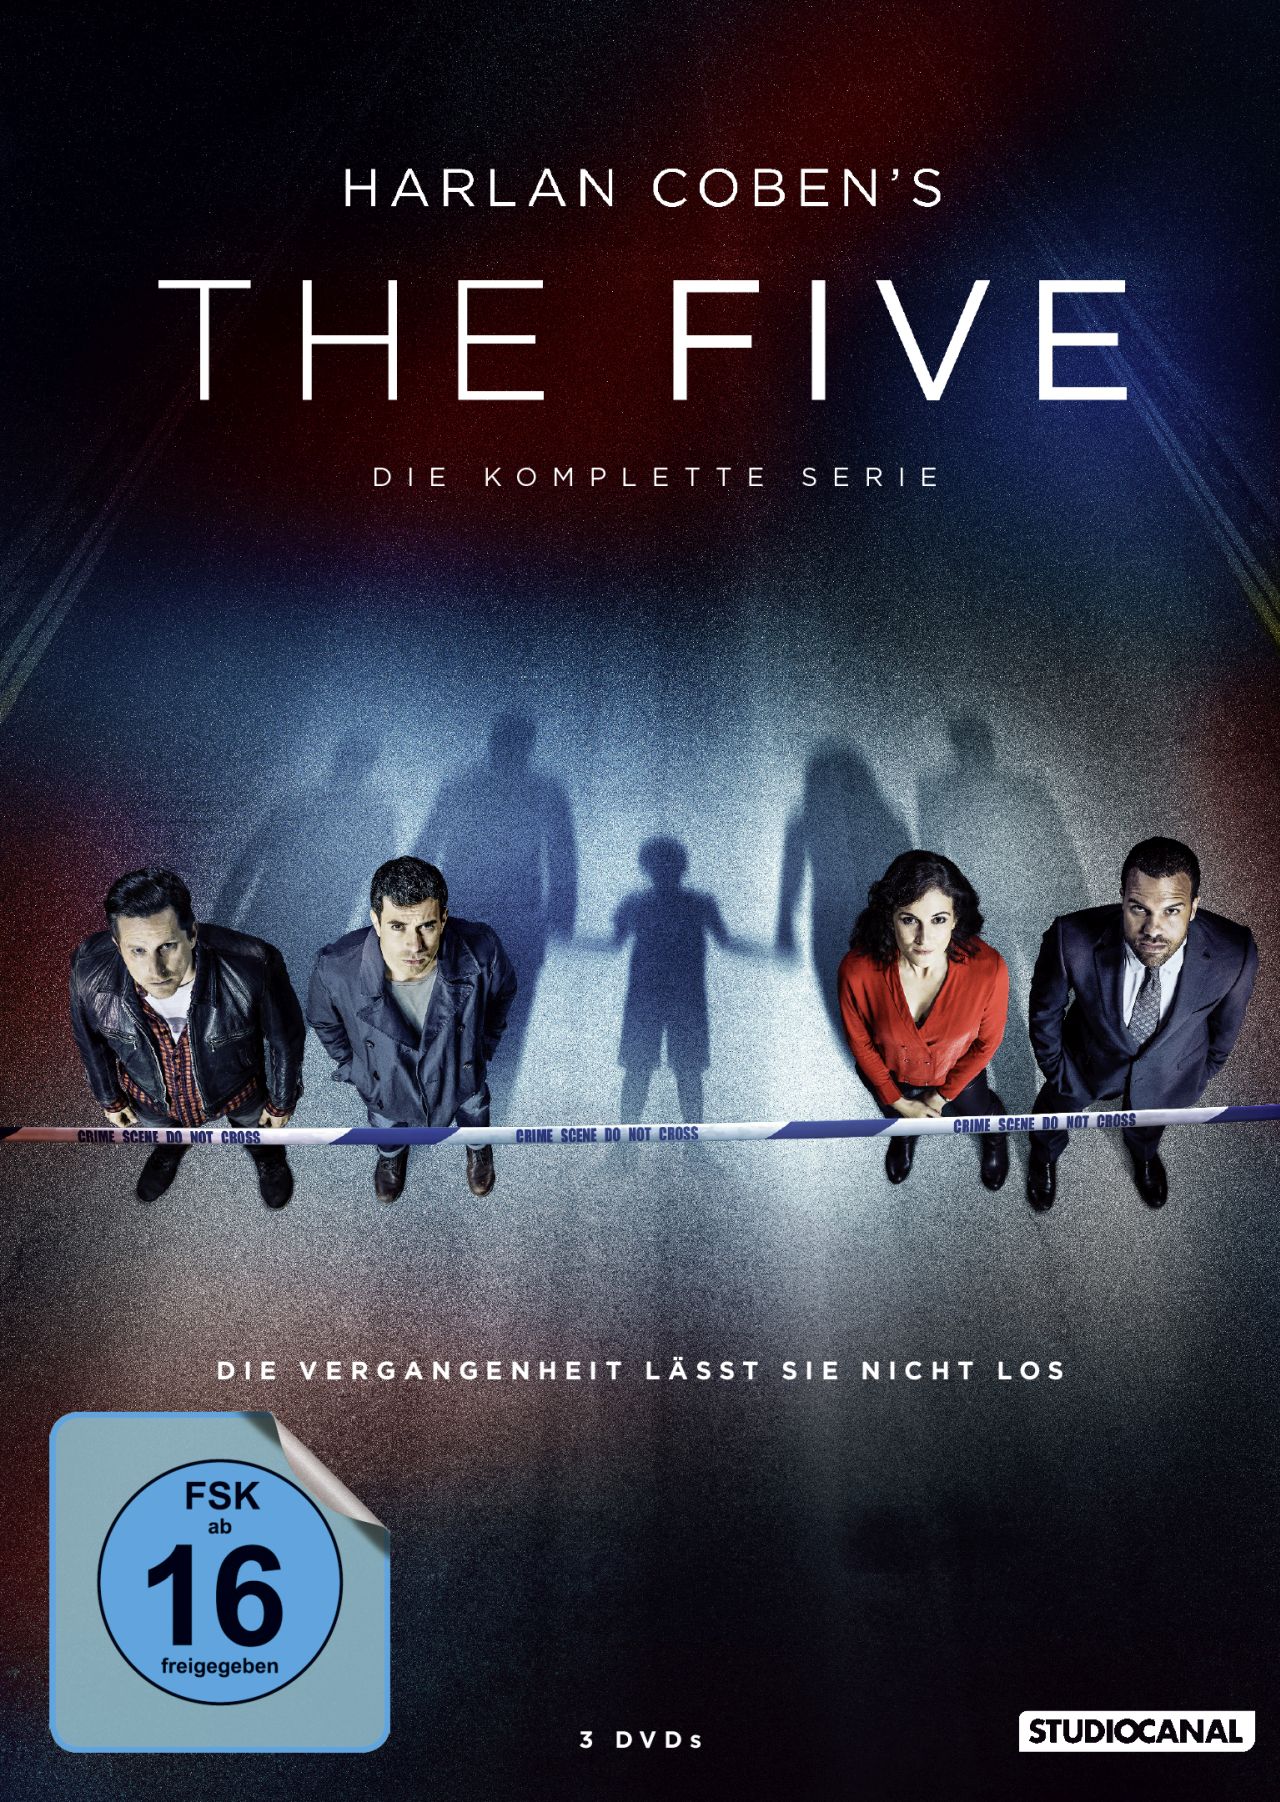 The Five - Die komplette Serie (3 DVDs) Cover